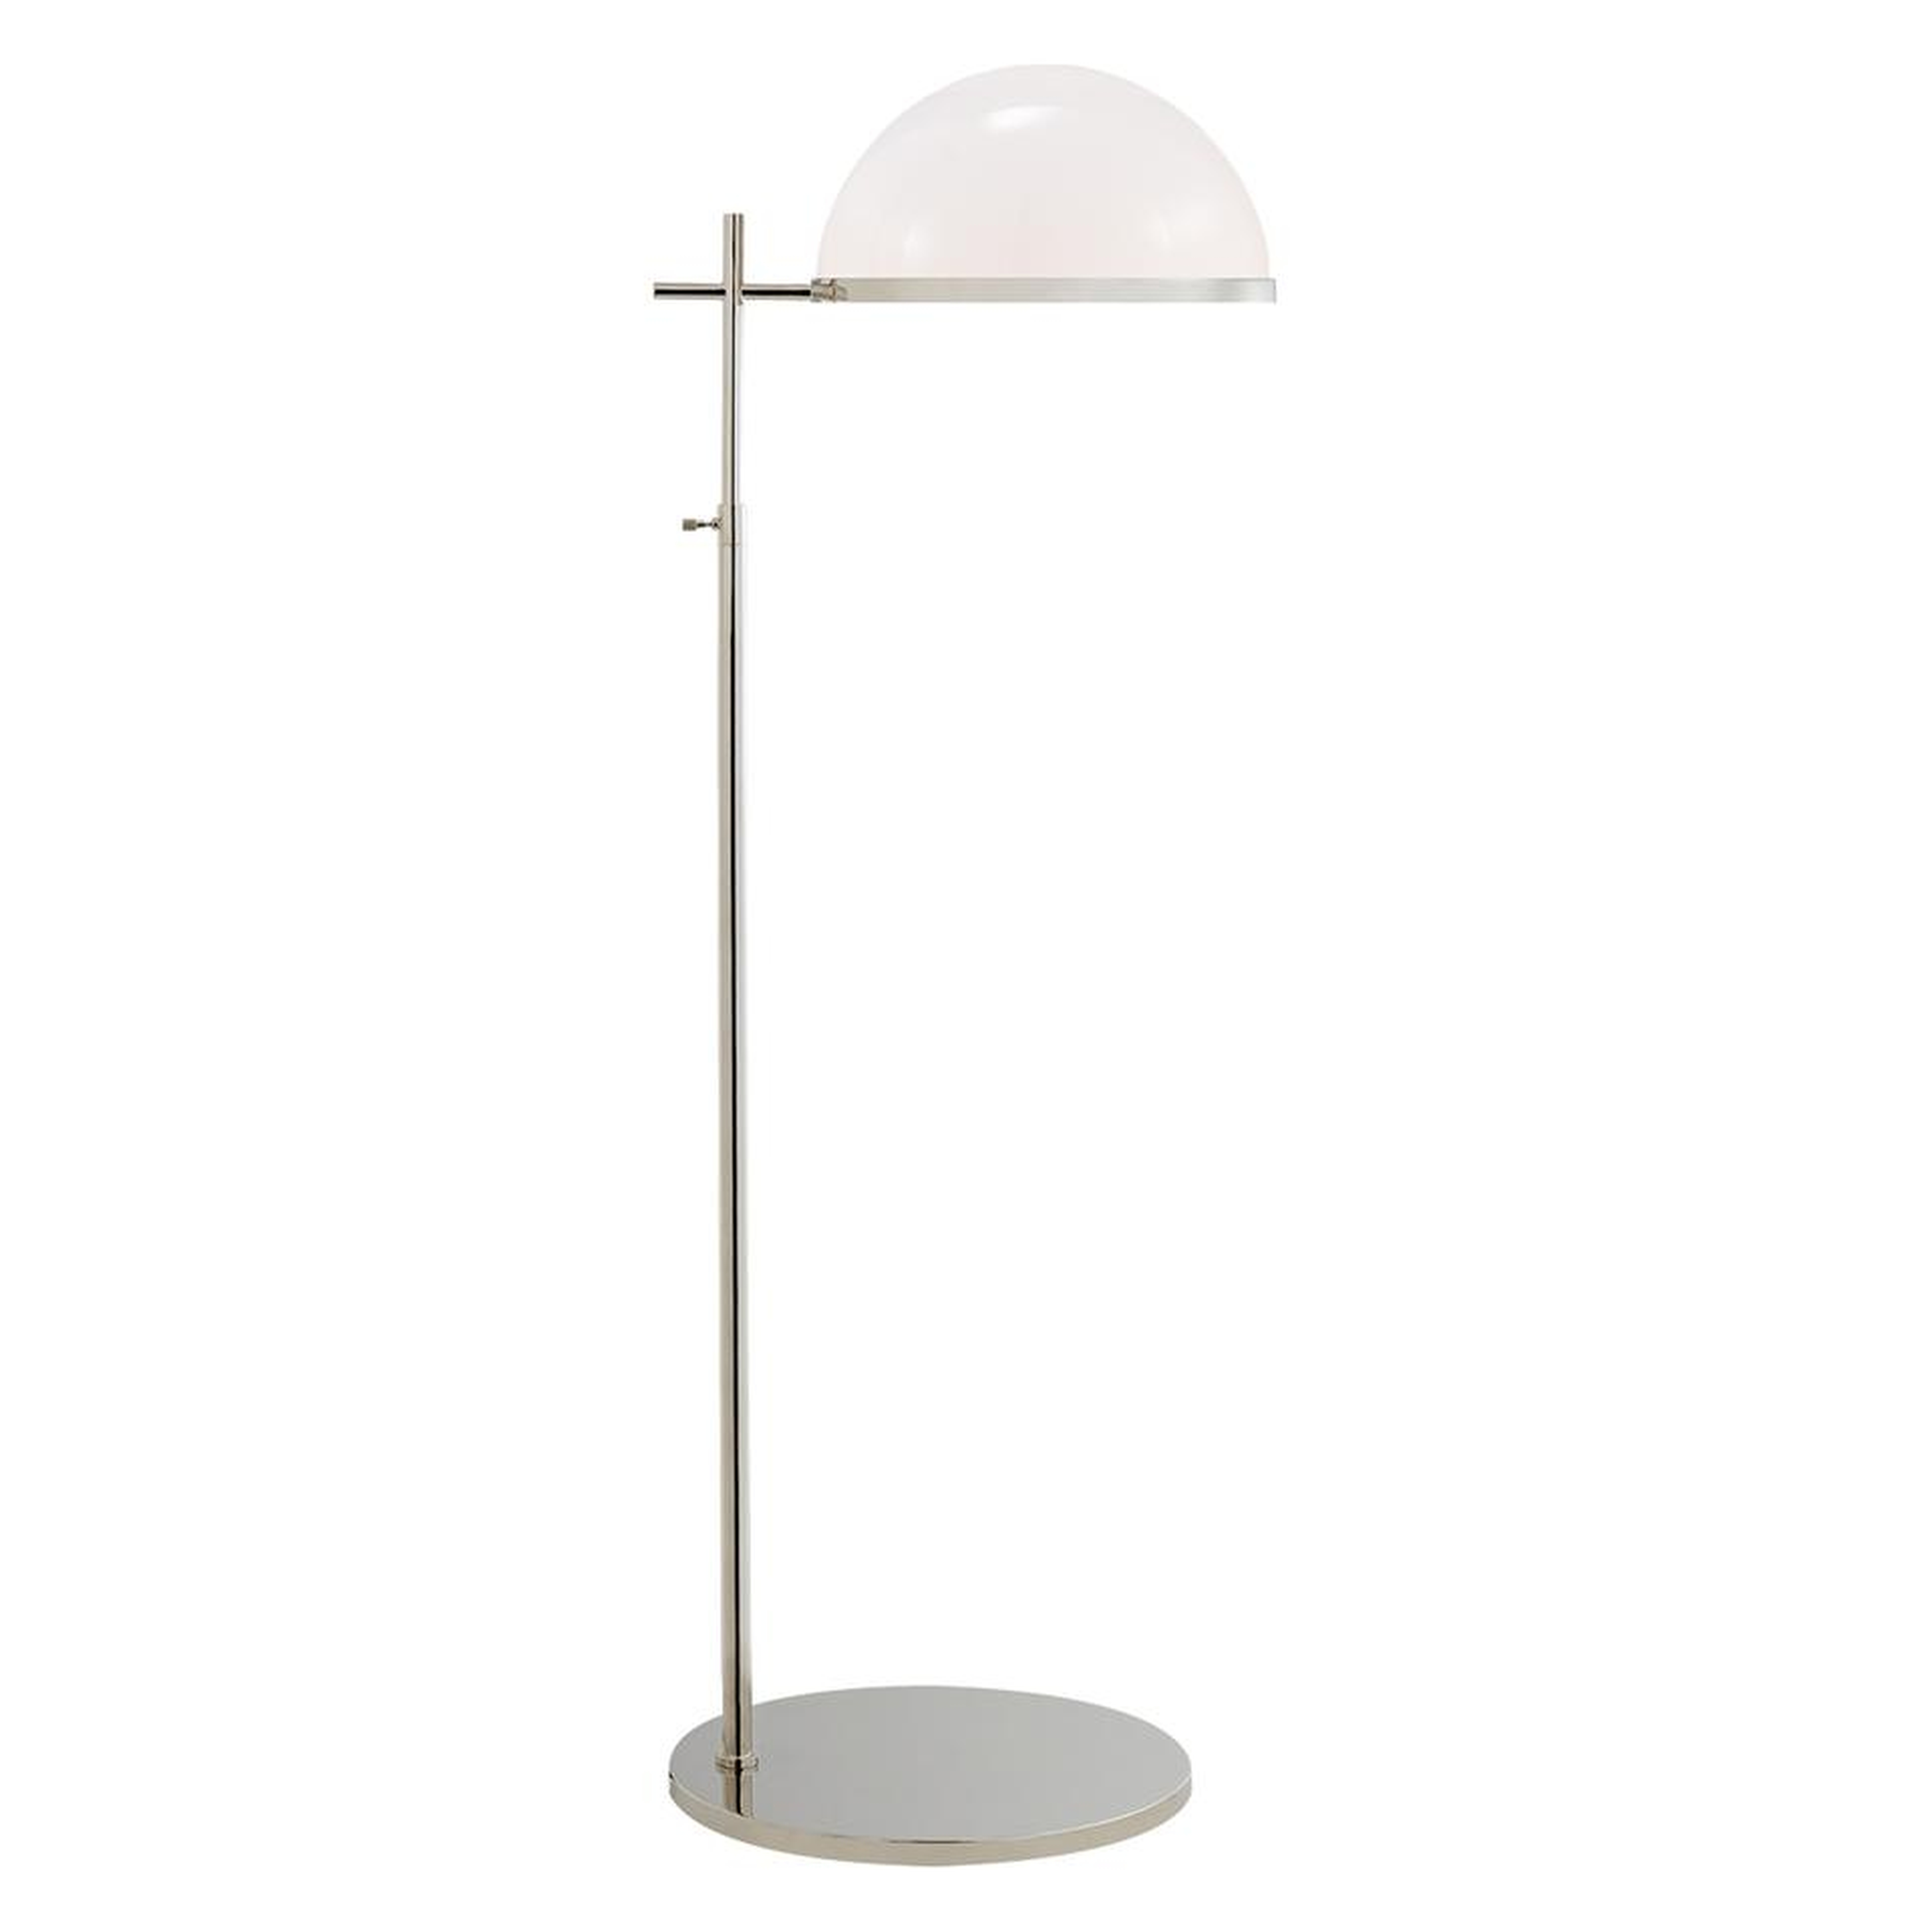 DULCET PHARMACY FLOOR LAMP - POLISHED NICKEL W/ WHITE GLASS - McGee & Co.